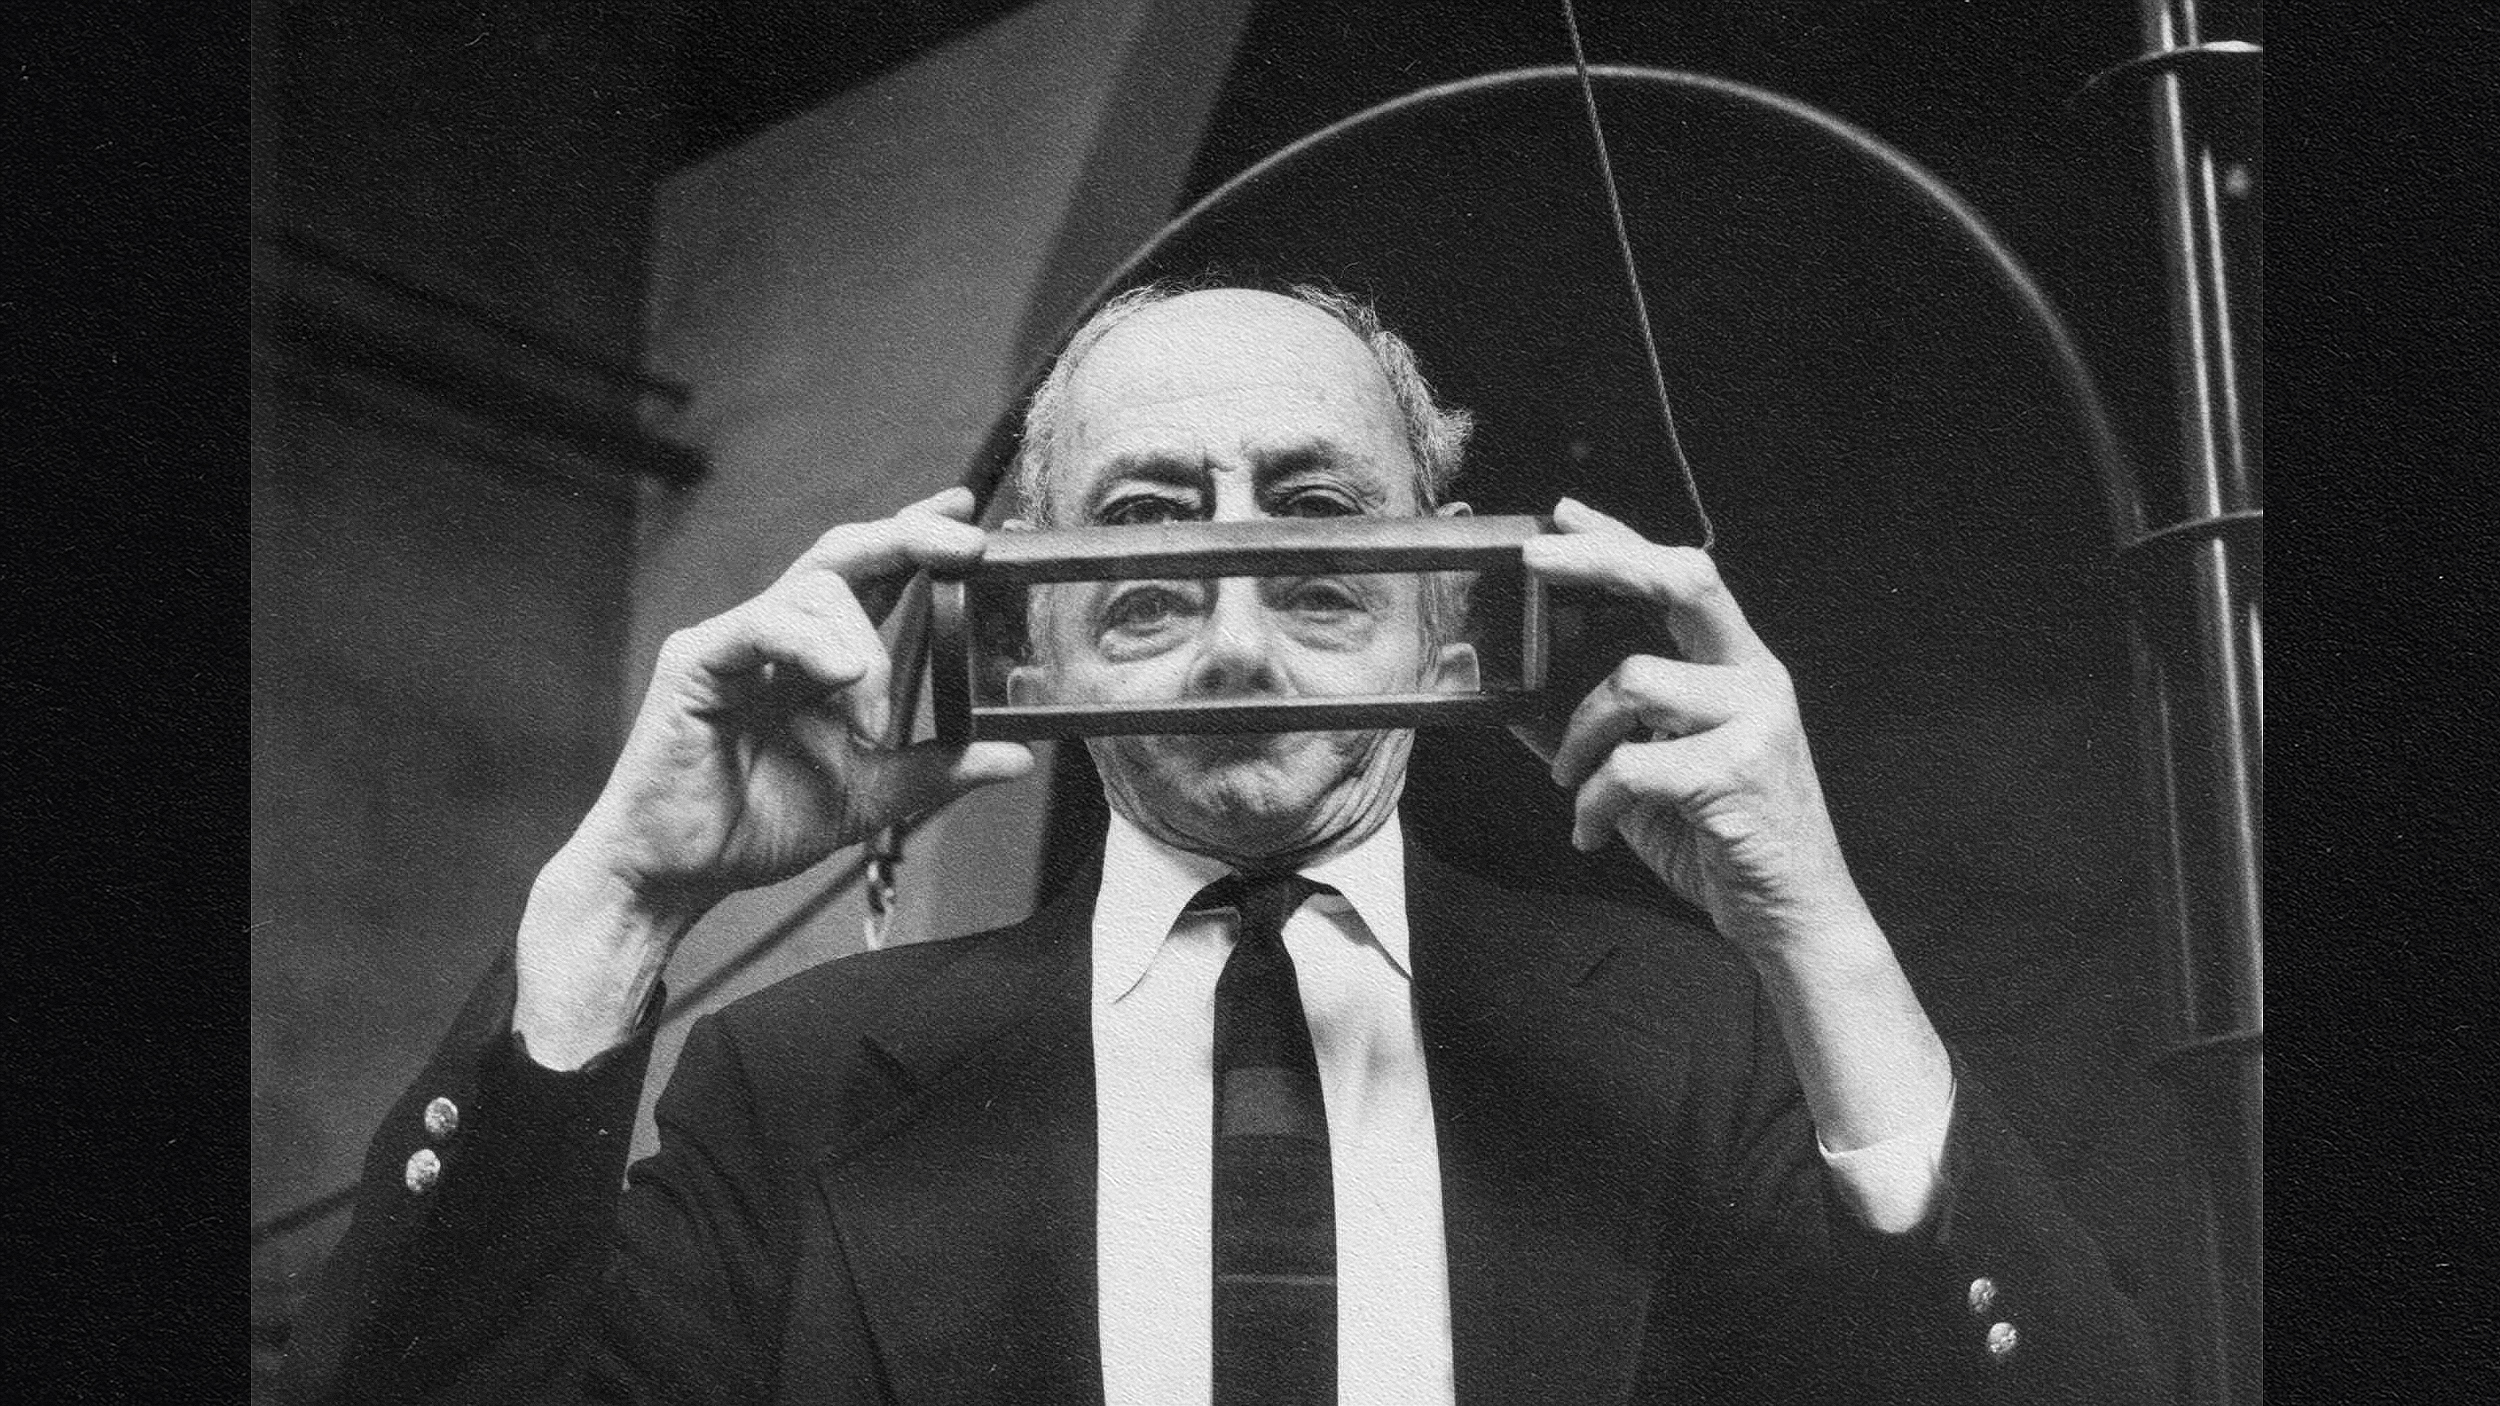 A man holding a transparent rectangular object up to his eyes, reminiscent of the analytical gaze of Robert and Frank Oppenheimer.